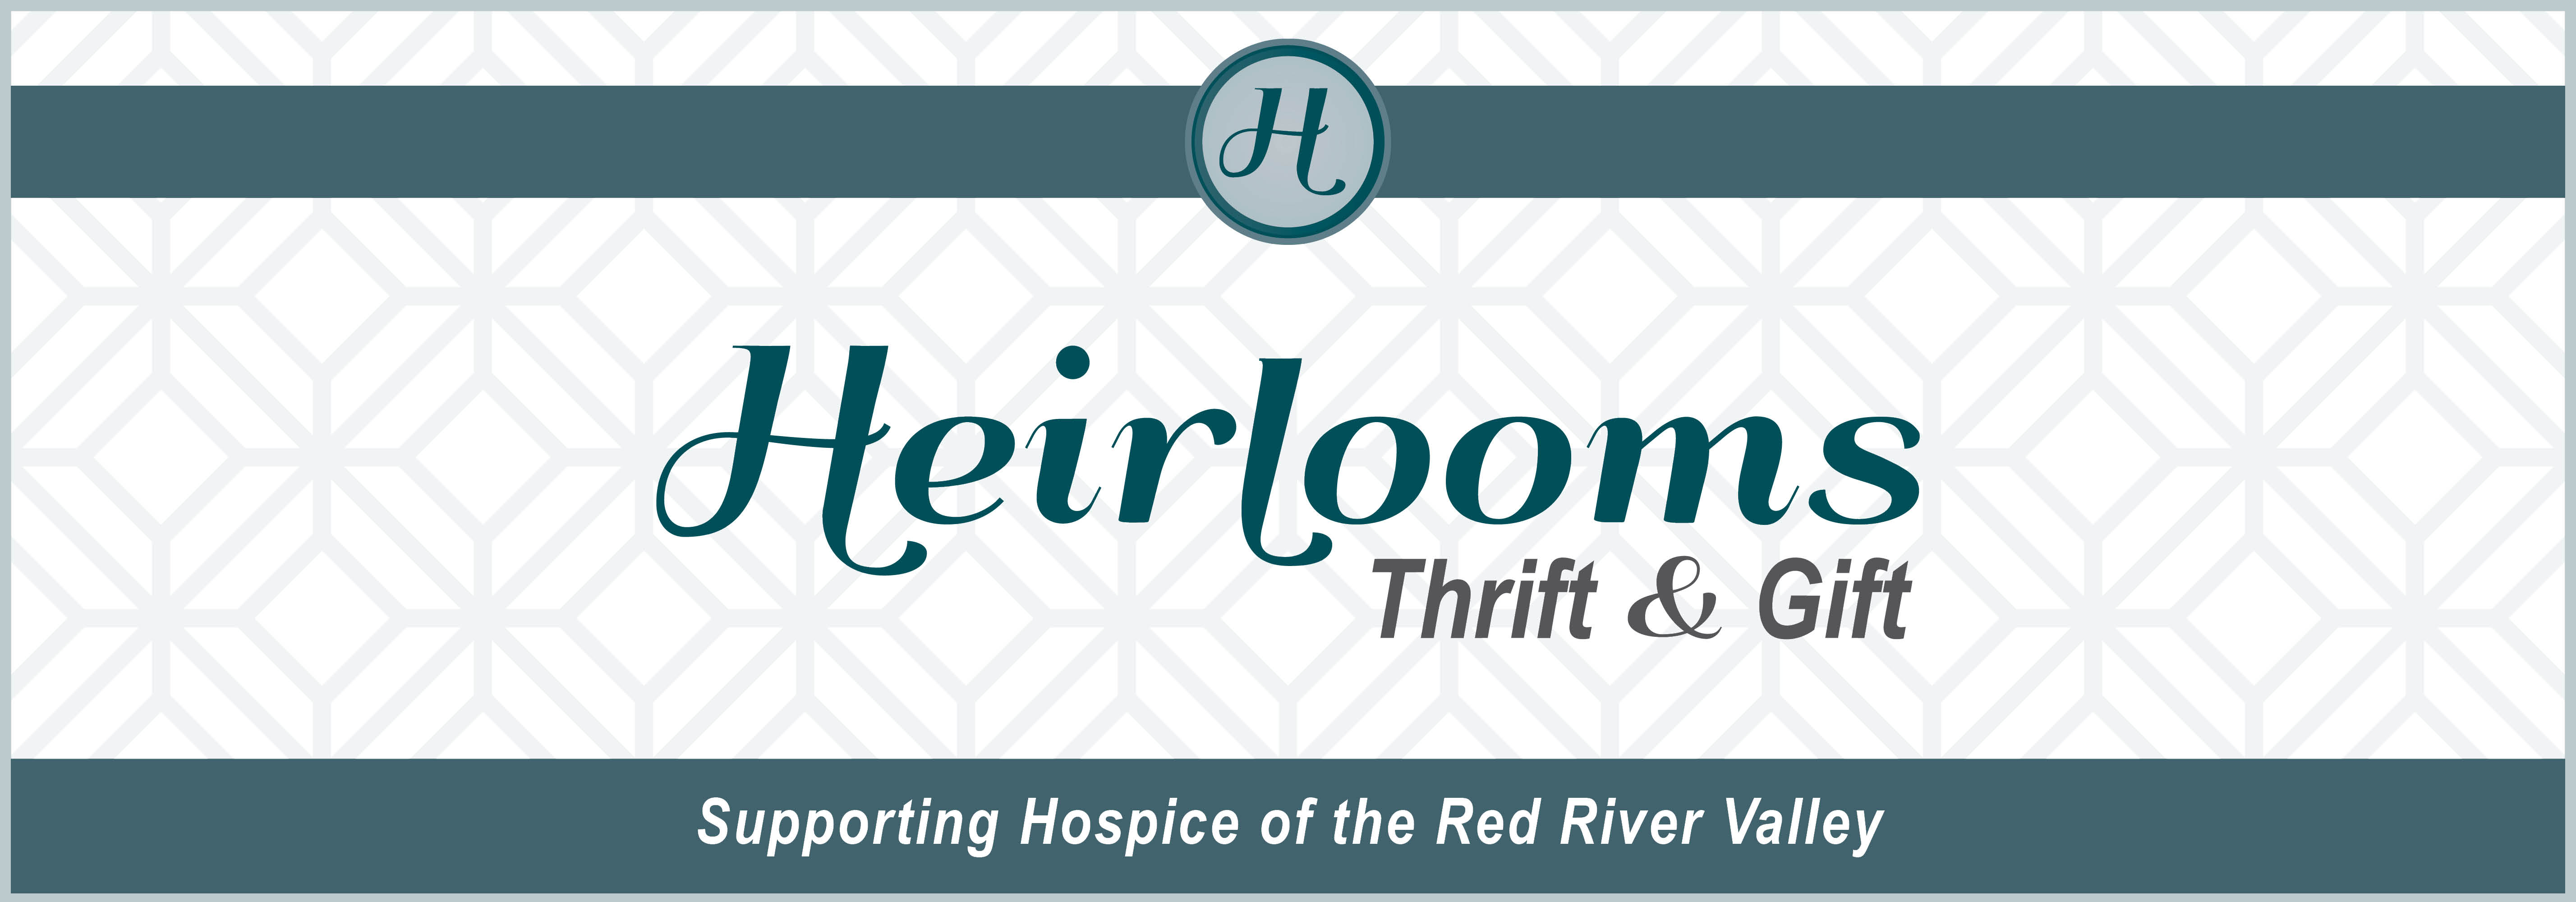 Graphic: Heirlooms Thrift & Gift